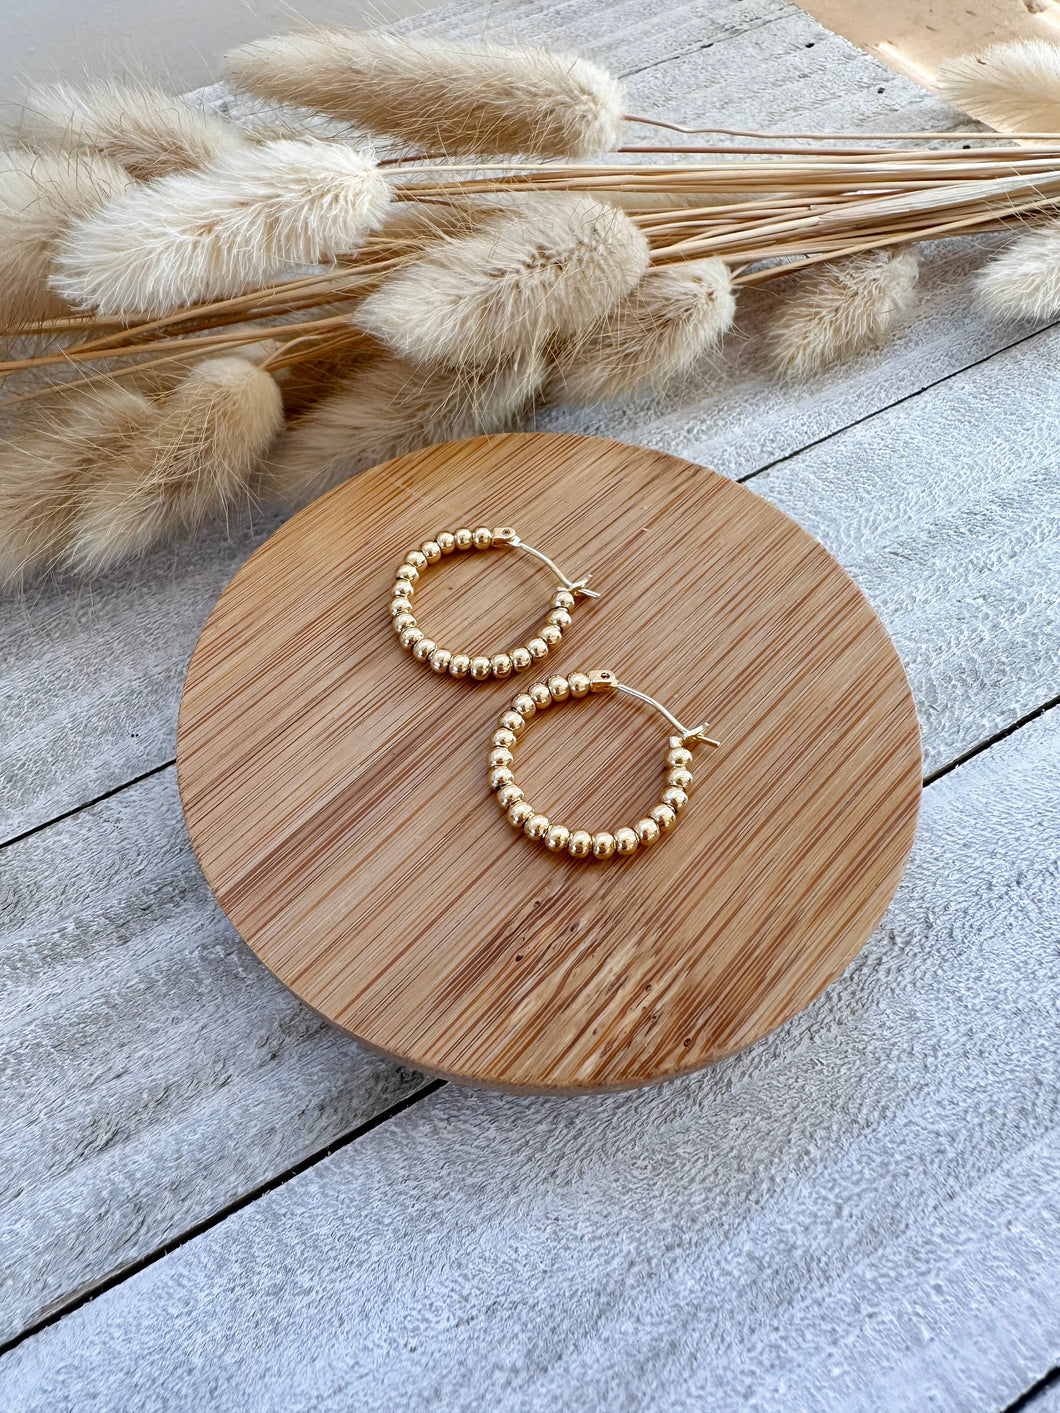 Eye-catching Gold Plated Bauble Hoops: Textured design adds modern flair to classic hoop earrings. Shop now for timeless elegance!